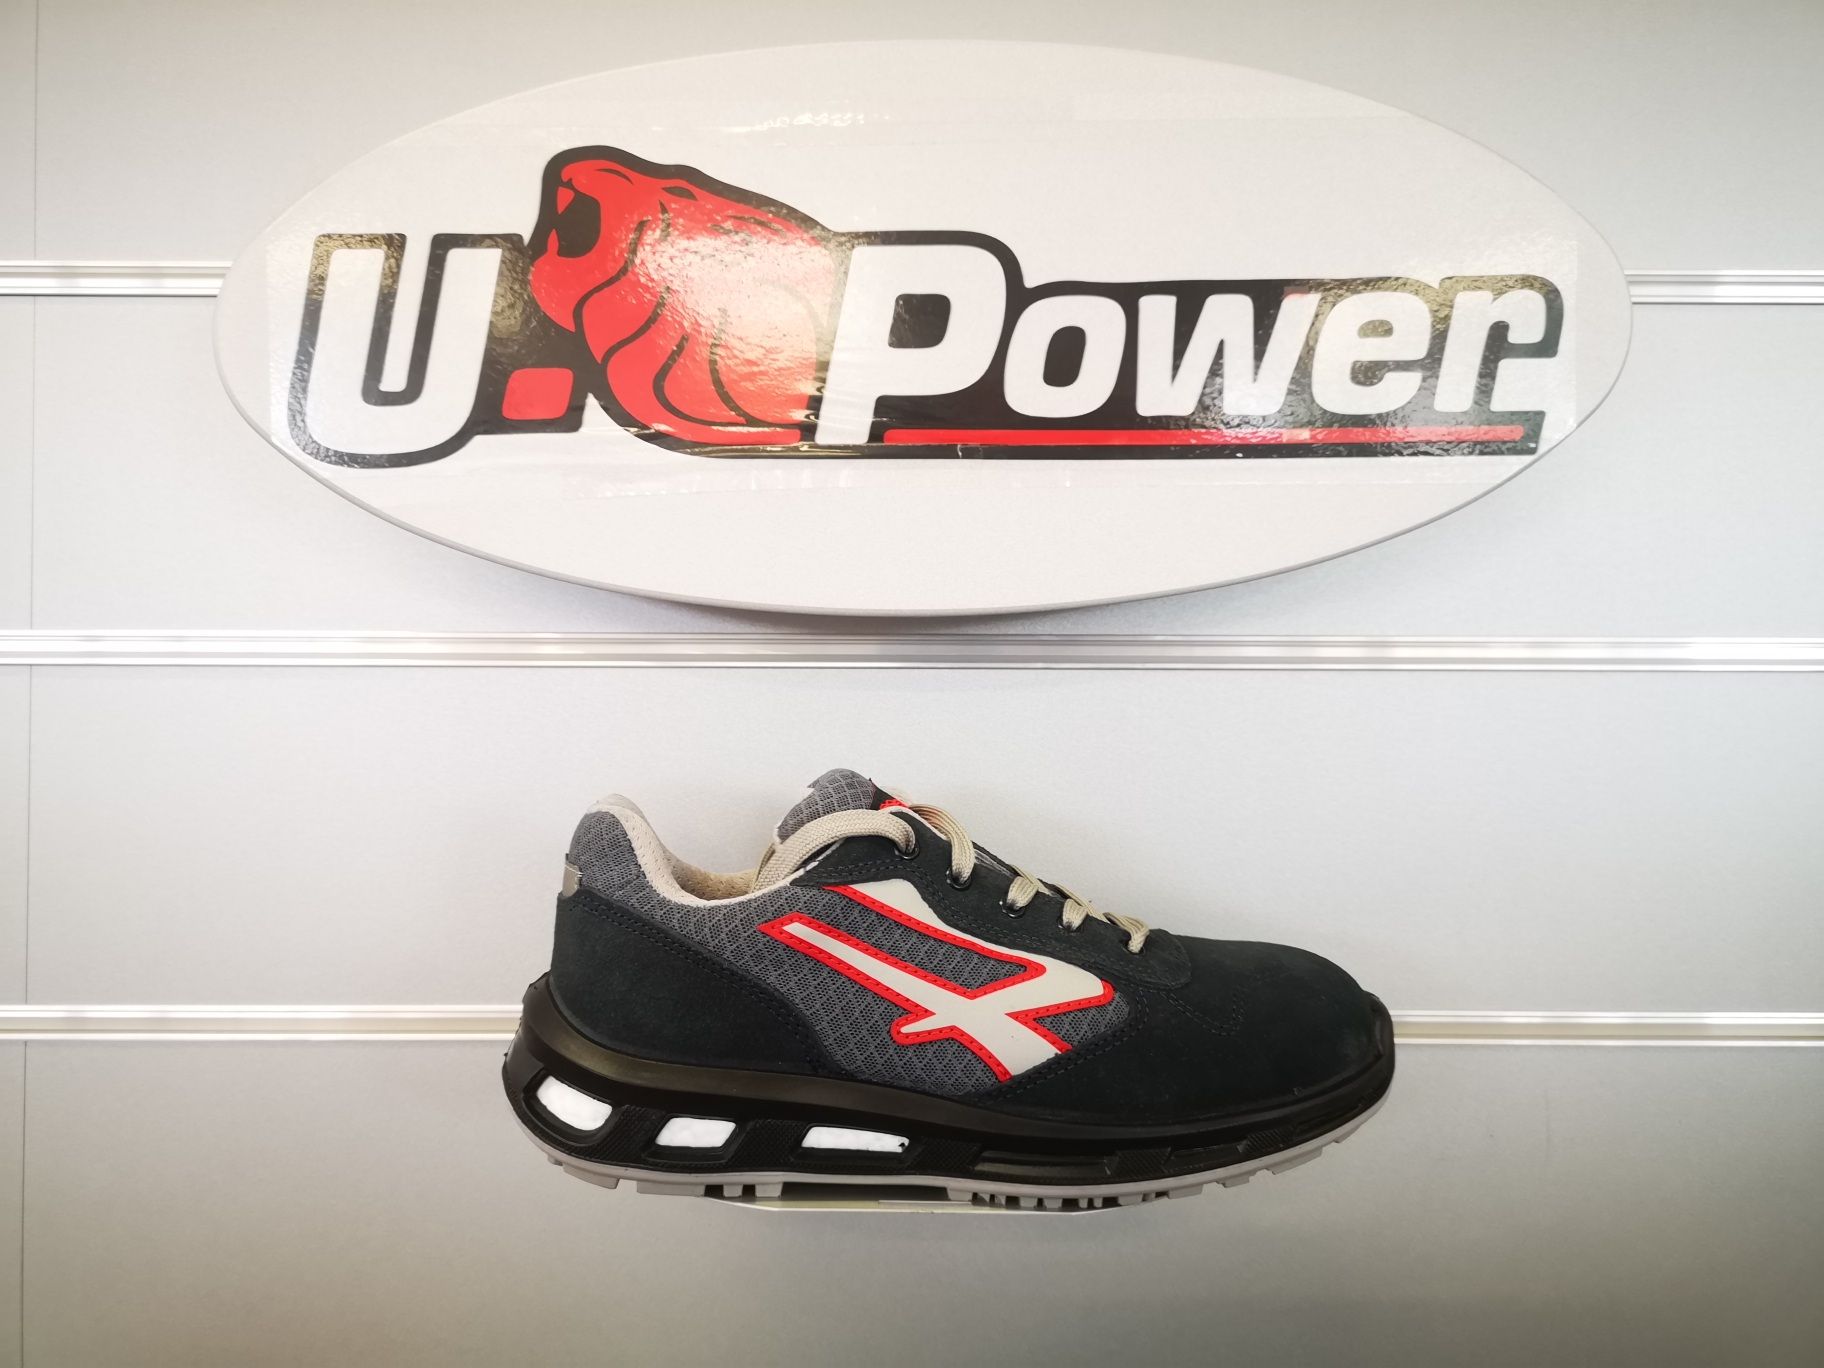 SCARPA ACTIVE UPOWER RED LION S1P